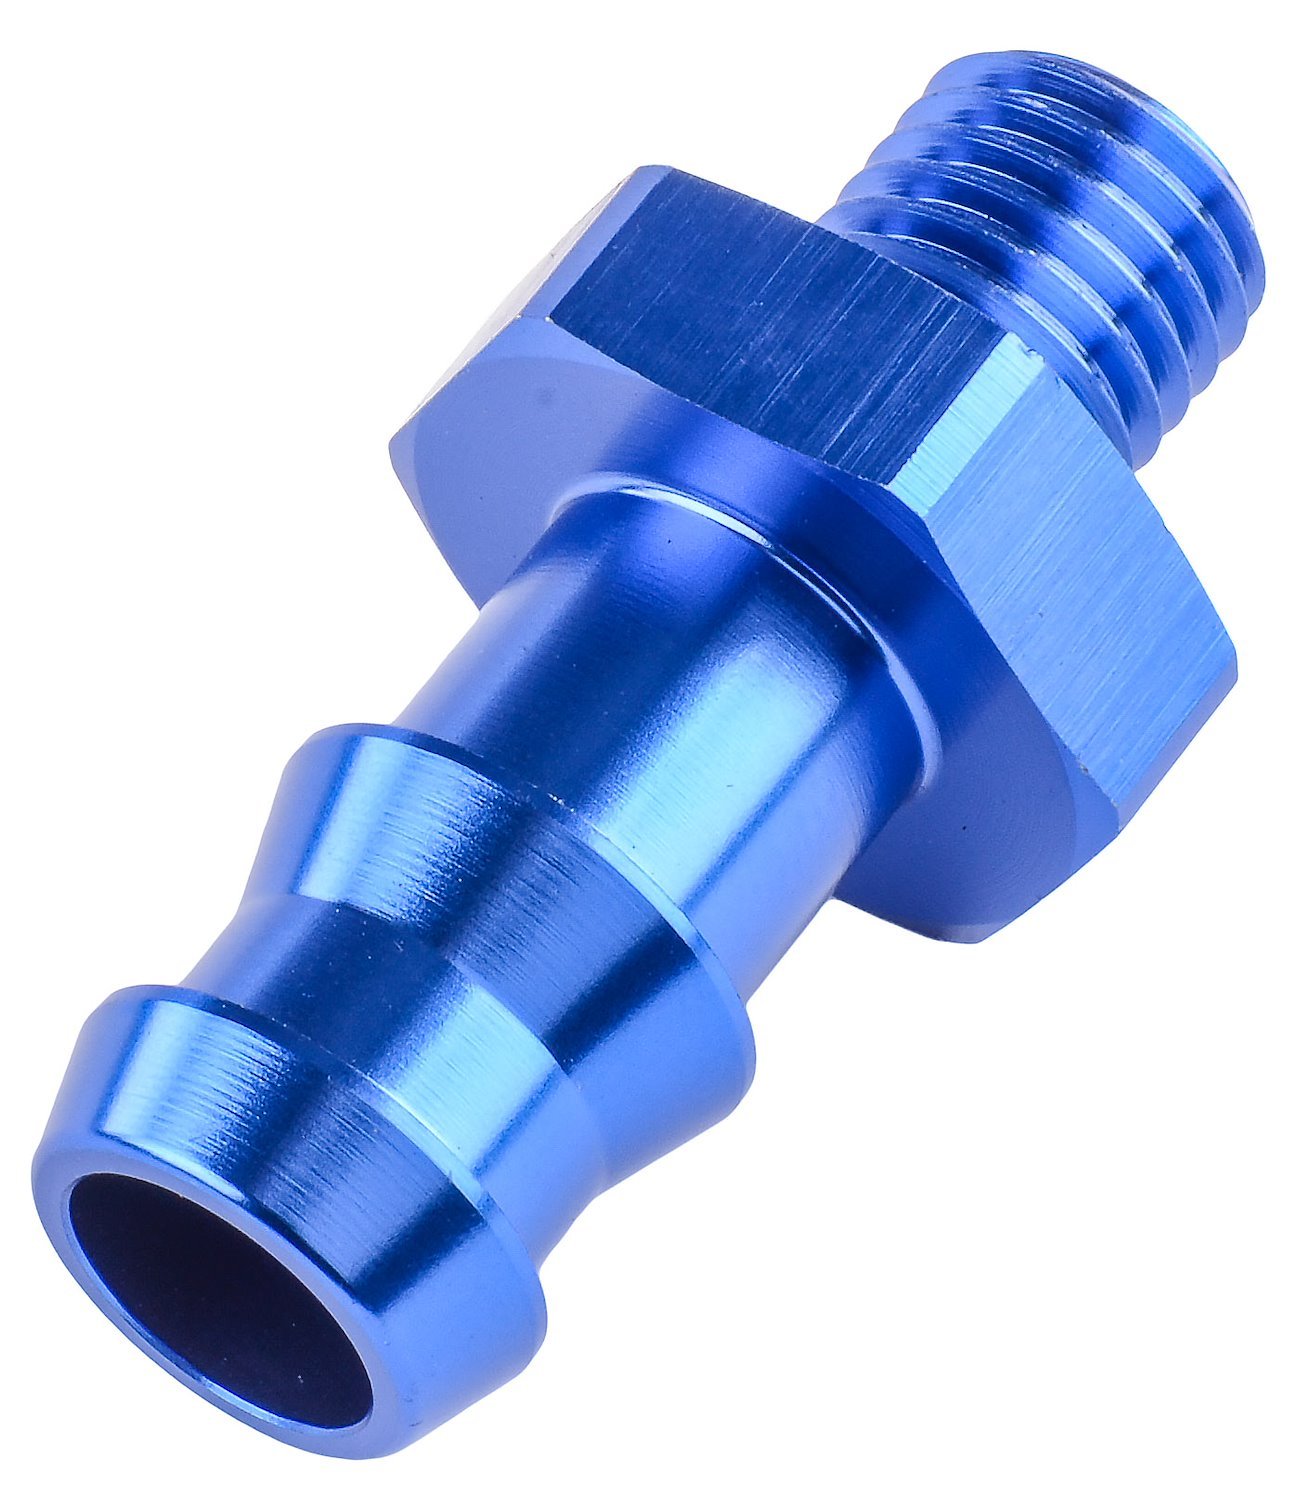 Hose Barb Adapter 12mm x 1.5 Male Straight to 1/2" Hose